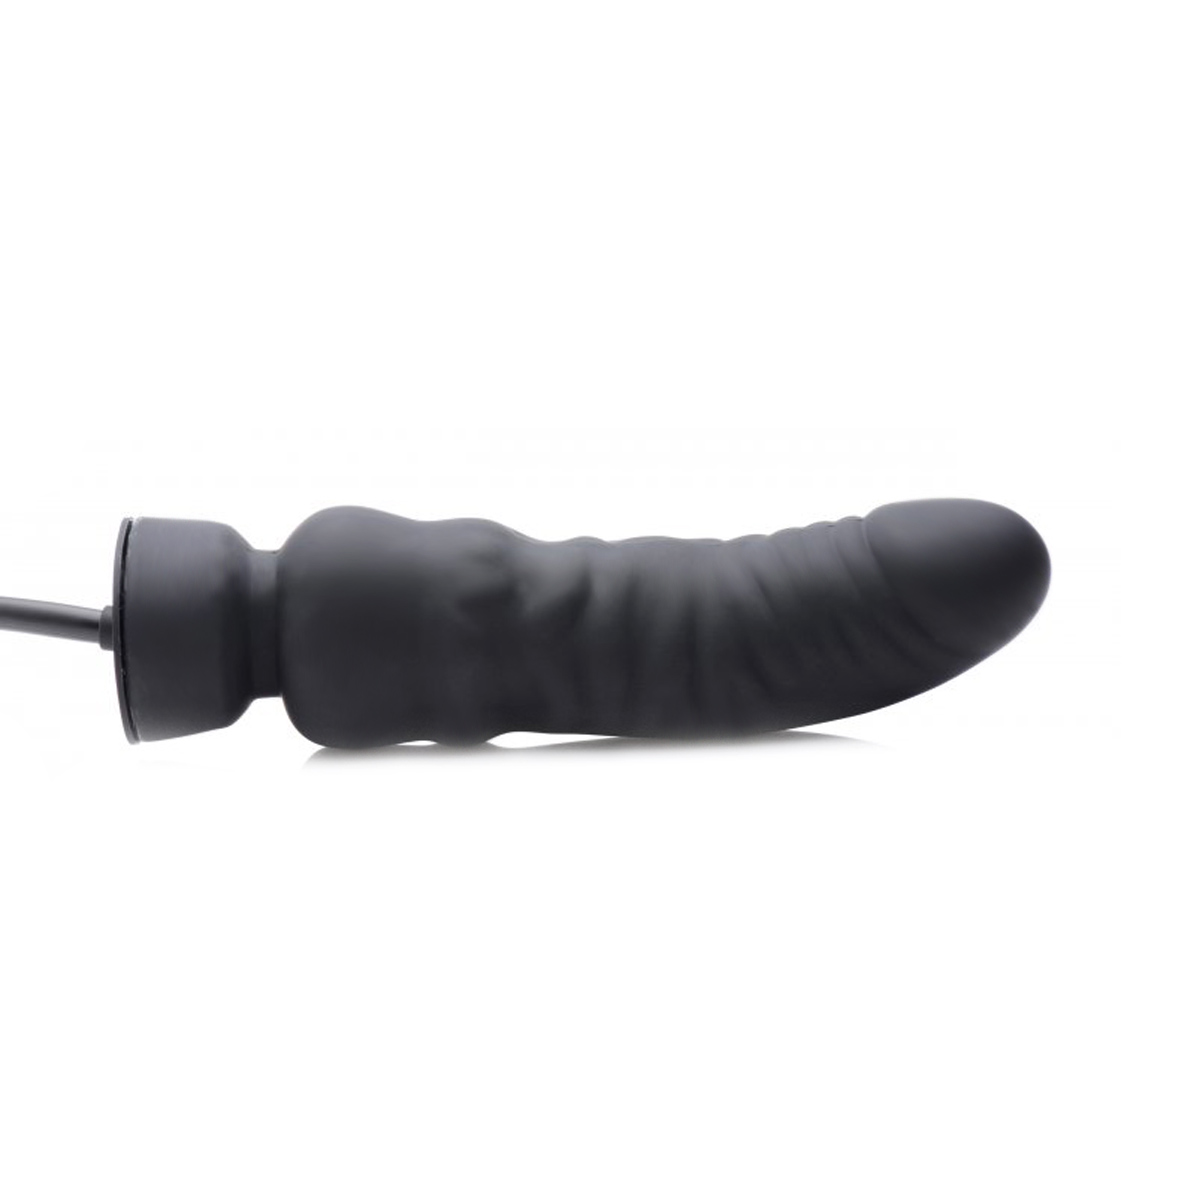 Dick-Spand-Inflatable-Silicone-Dildo-118-XR-AG554-1